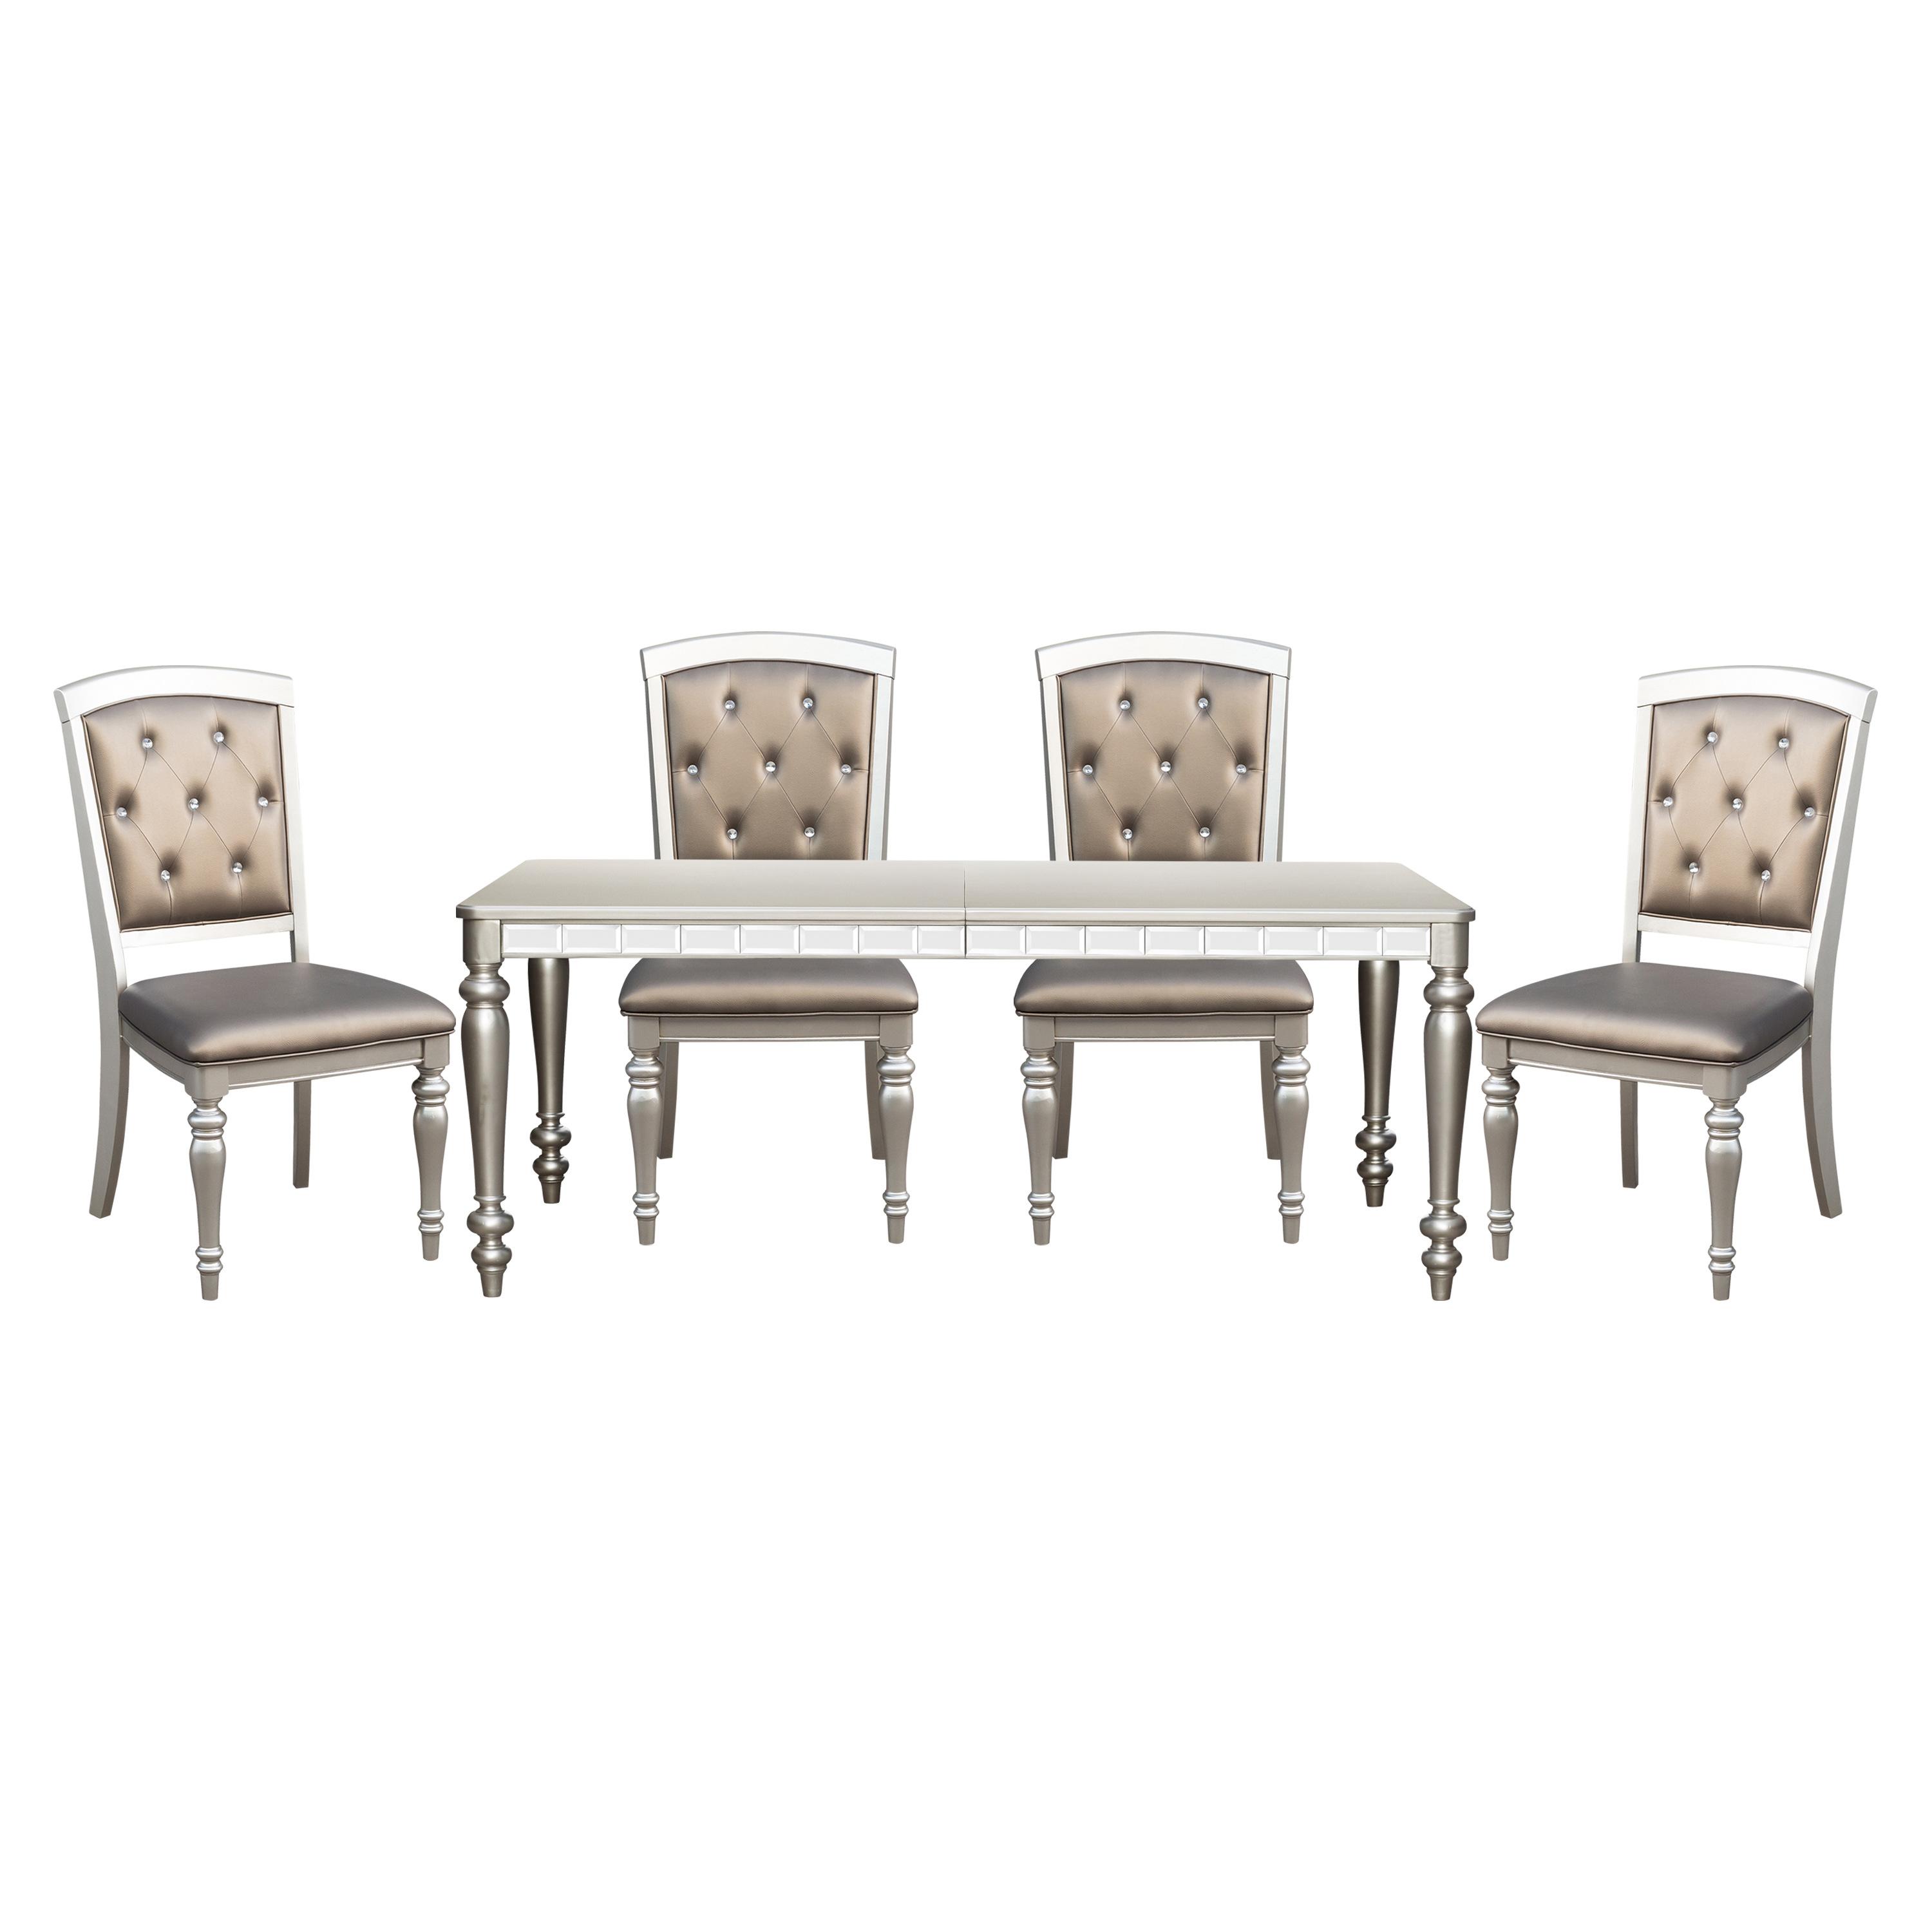 Modern Dining Room Set 5477N-96*5PC Orsina 5477N-96*5PC in Silver Faux Leather